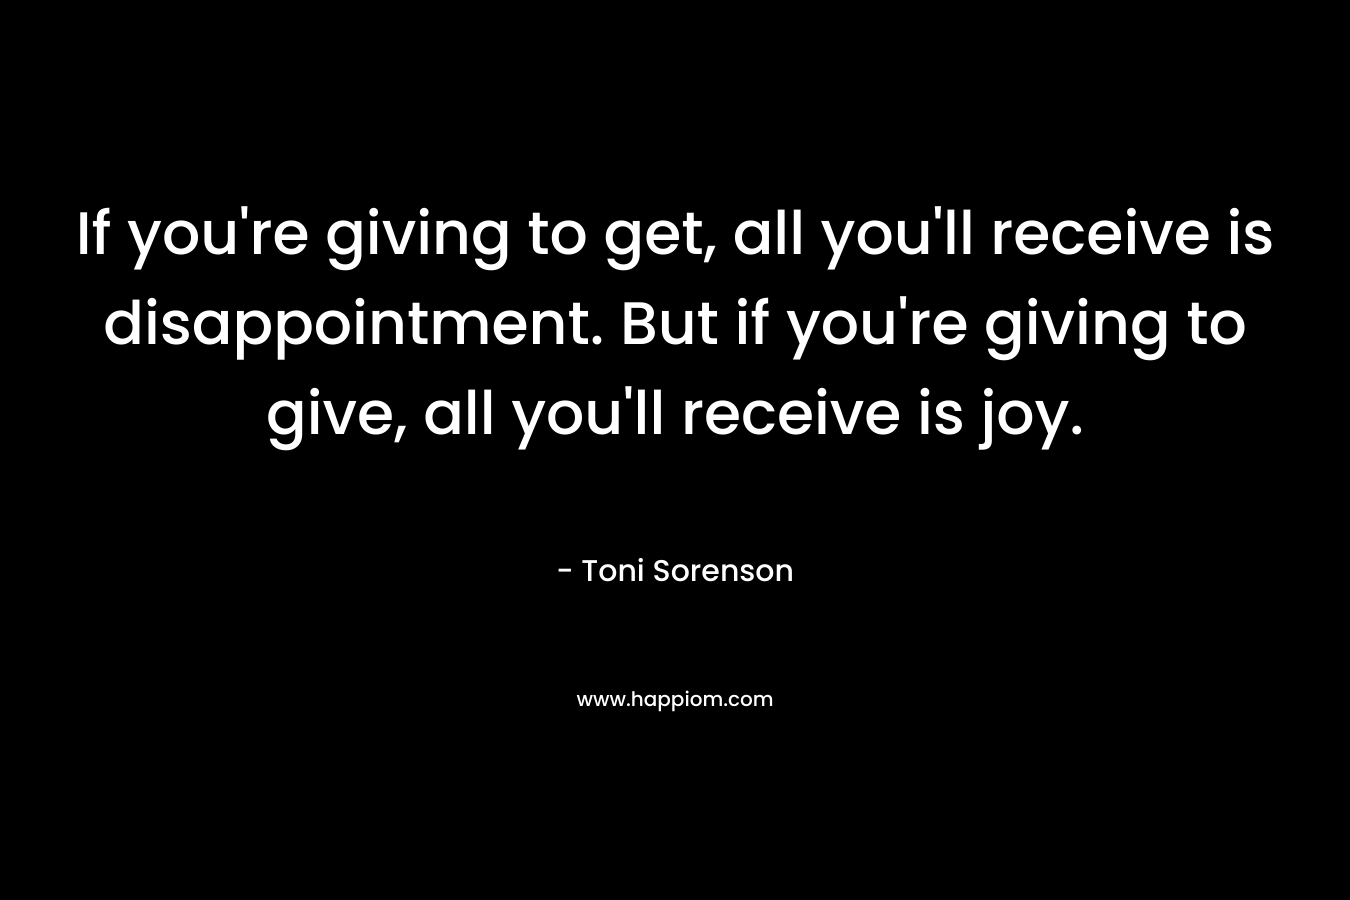 If you're giving to get, all you'll receive is disappointment. But if you're giving to give, all you'll receive is joy.